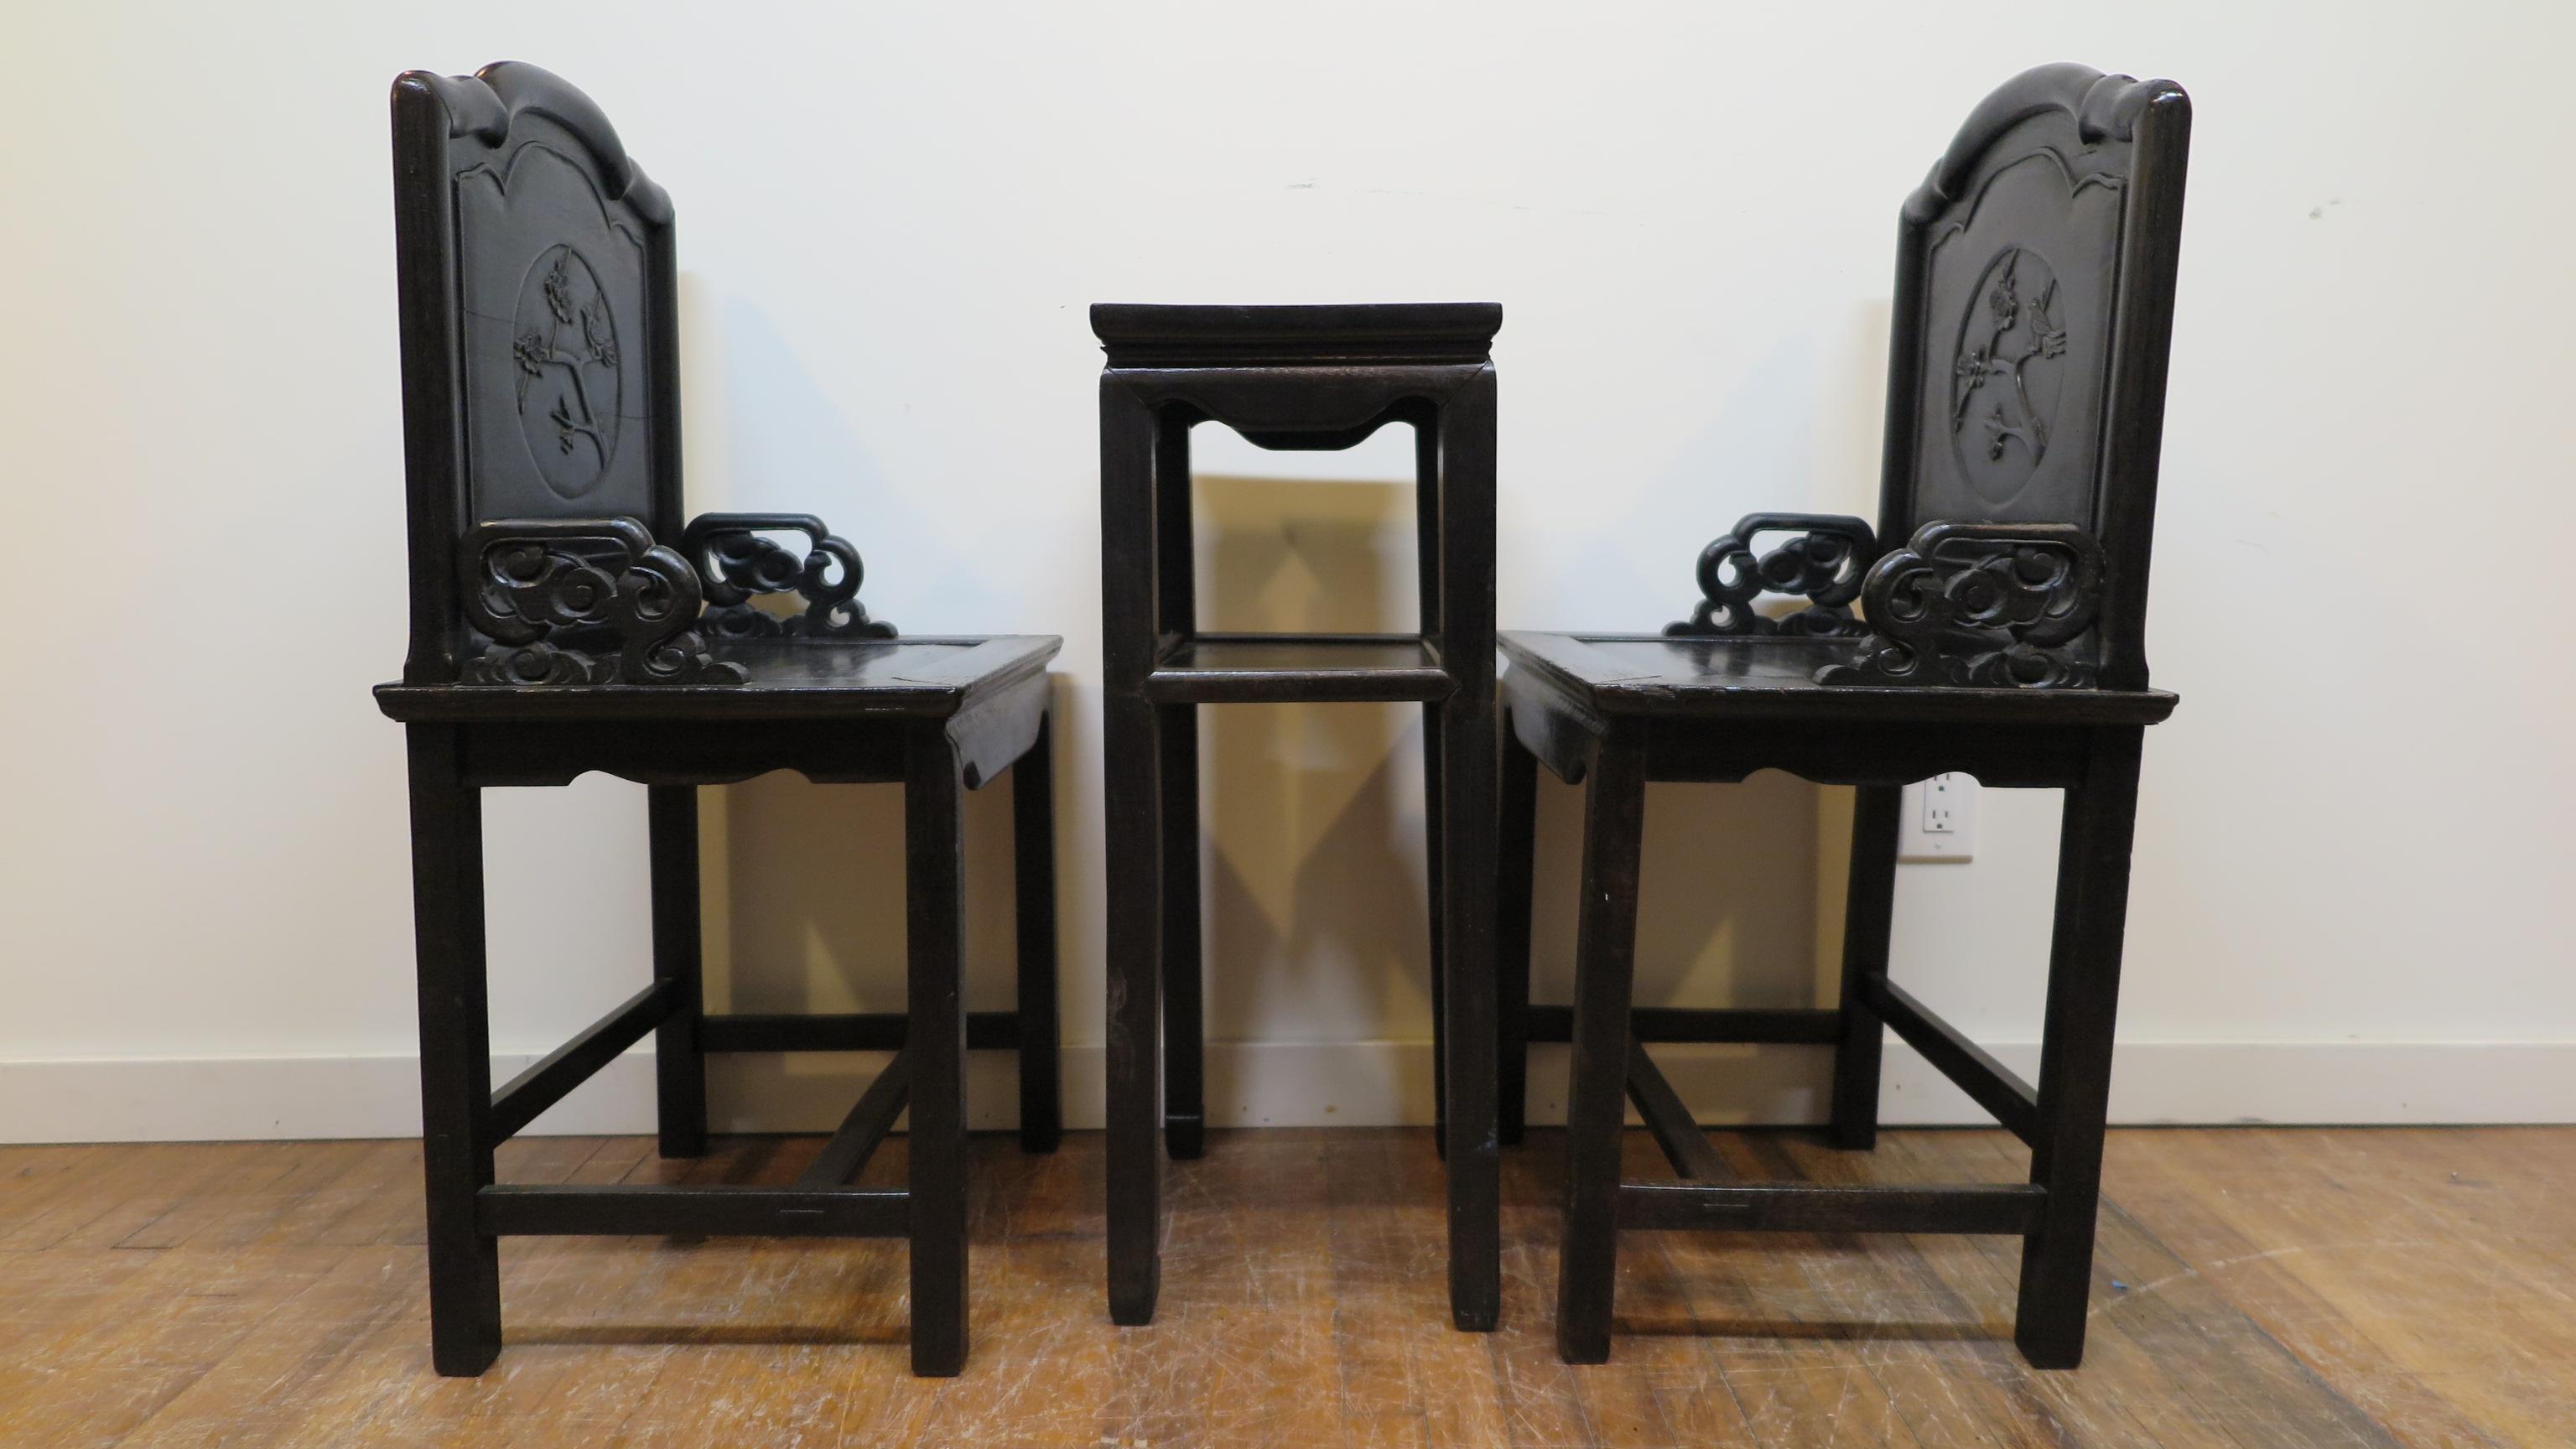 A late Qing dynasty Zitan wood chair set with table. Very nice table with two chairs made of rare Chinese hardwood, Zitan wood. The wood is very heavy and dense, sometimes referred to as Iron Wood. Color is blackish purple on finished sides. In good